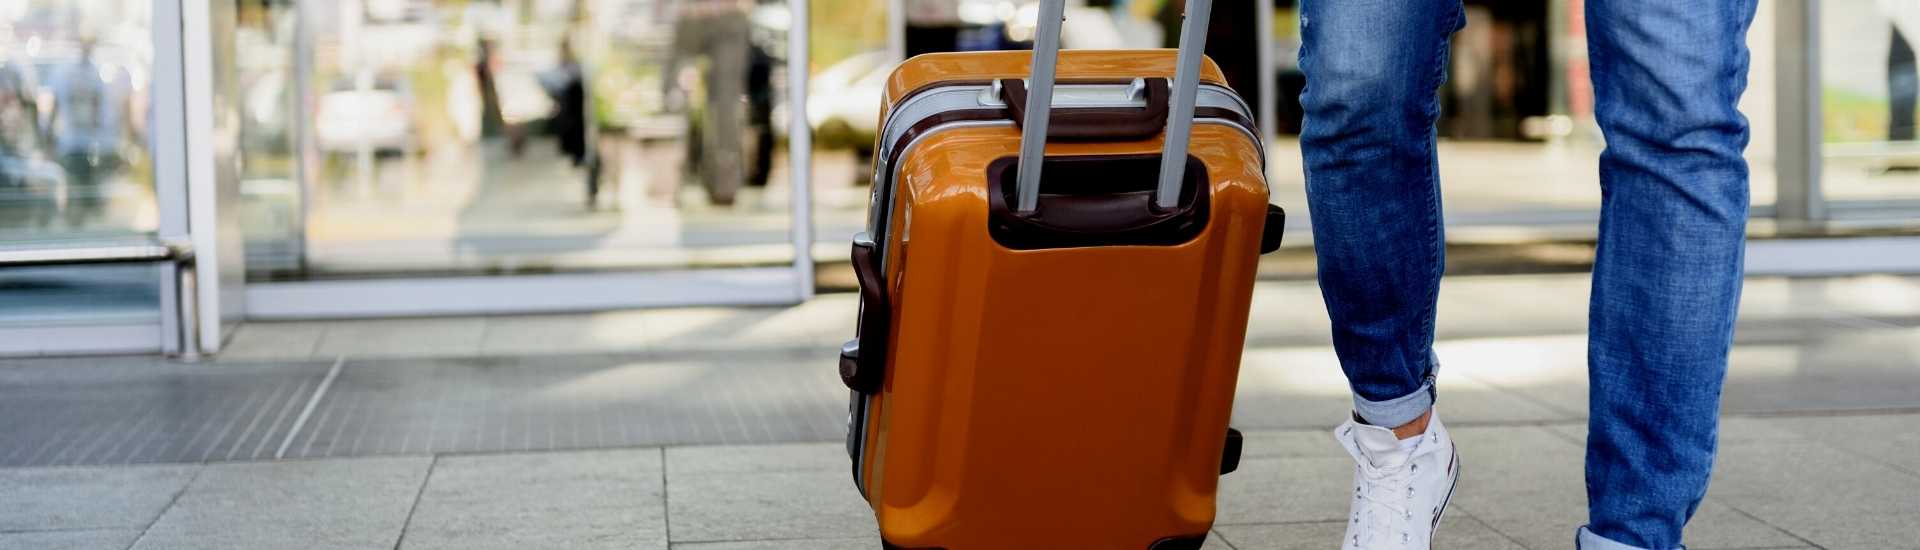 Baggage Policy | WOLO Travel